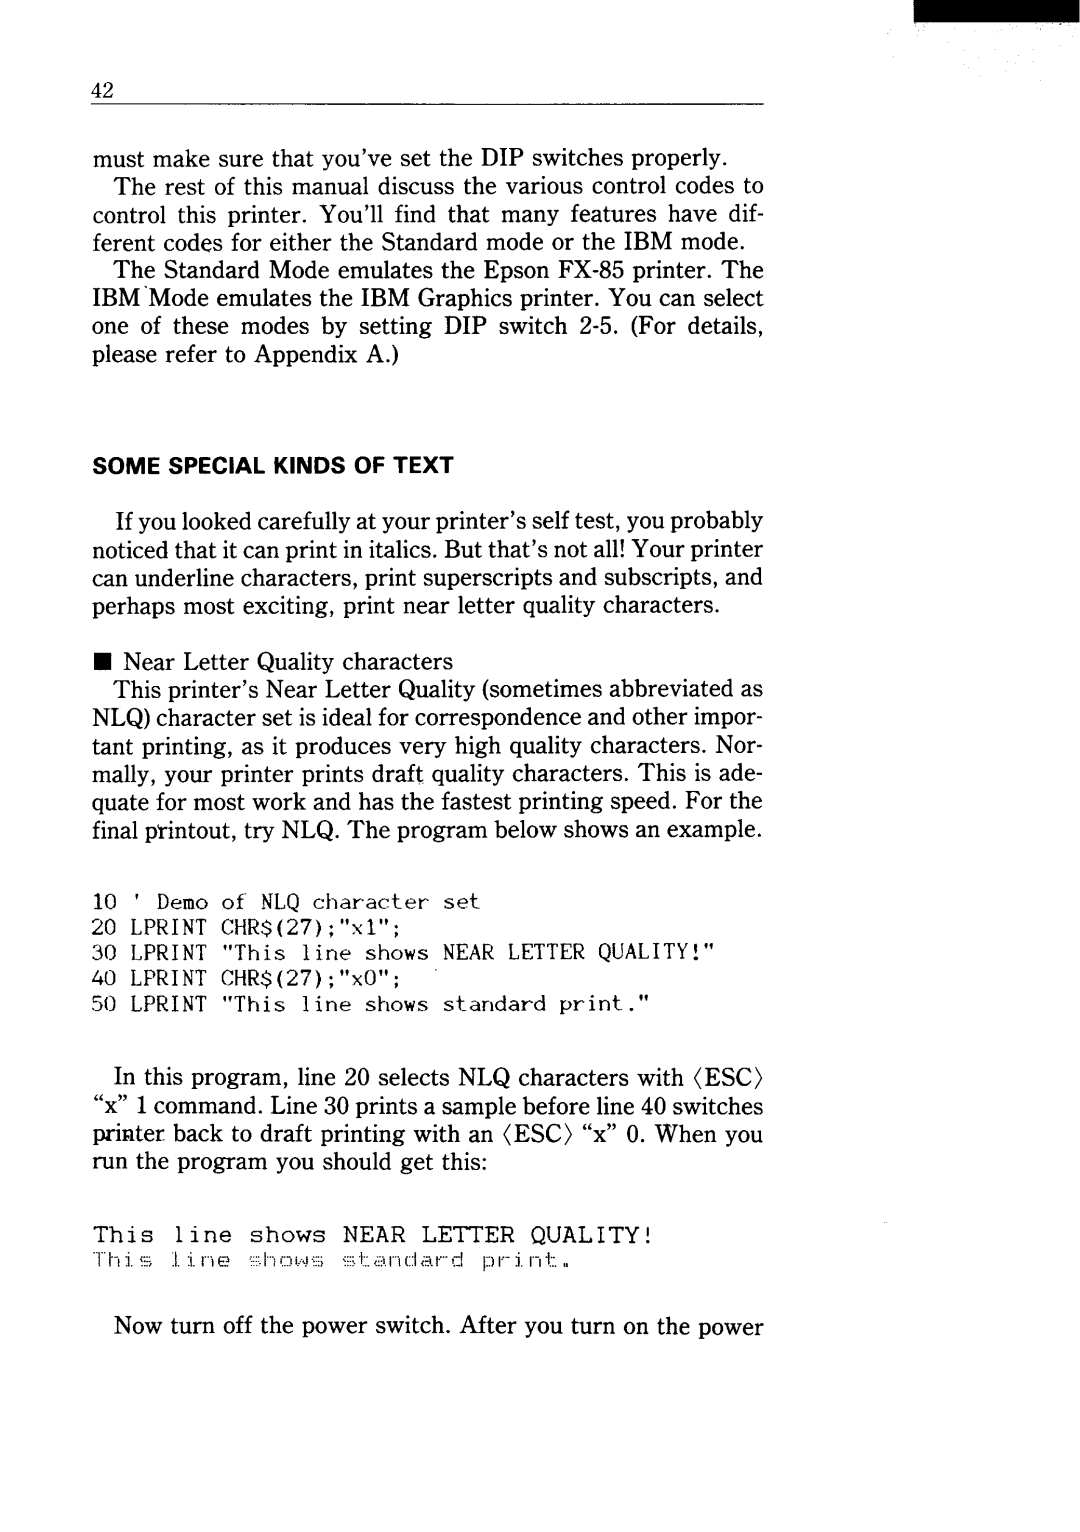 Star Micronics NX-15 user manual Near Letter Quality characters 